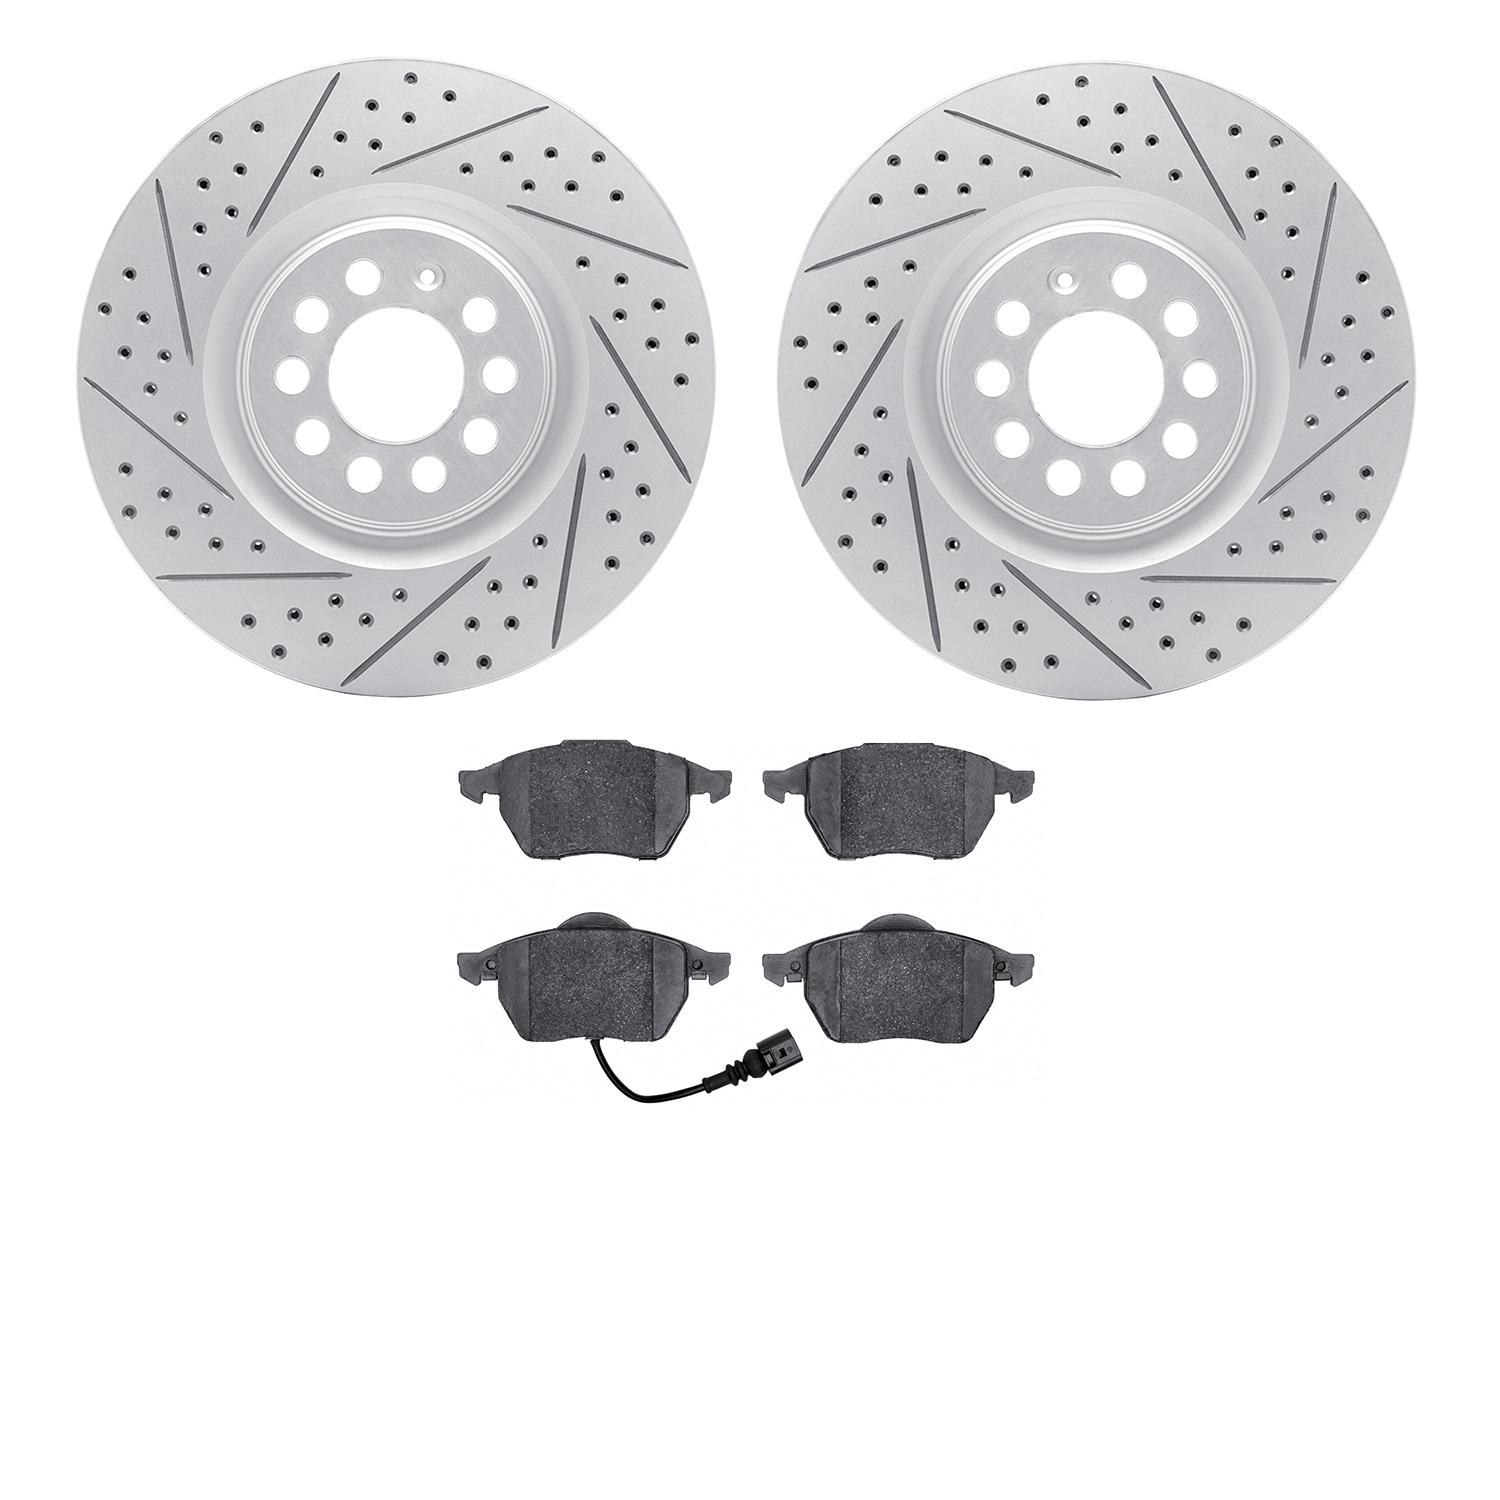 2502-74026 Geoperformance Drilled/Slotted Rotors w/5000 Advanced Brake Pads Kit, 2001-2006 Audi/Volkswagen, Position: Front